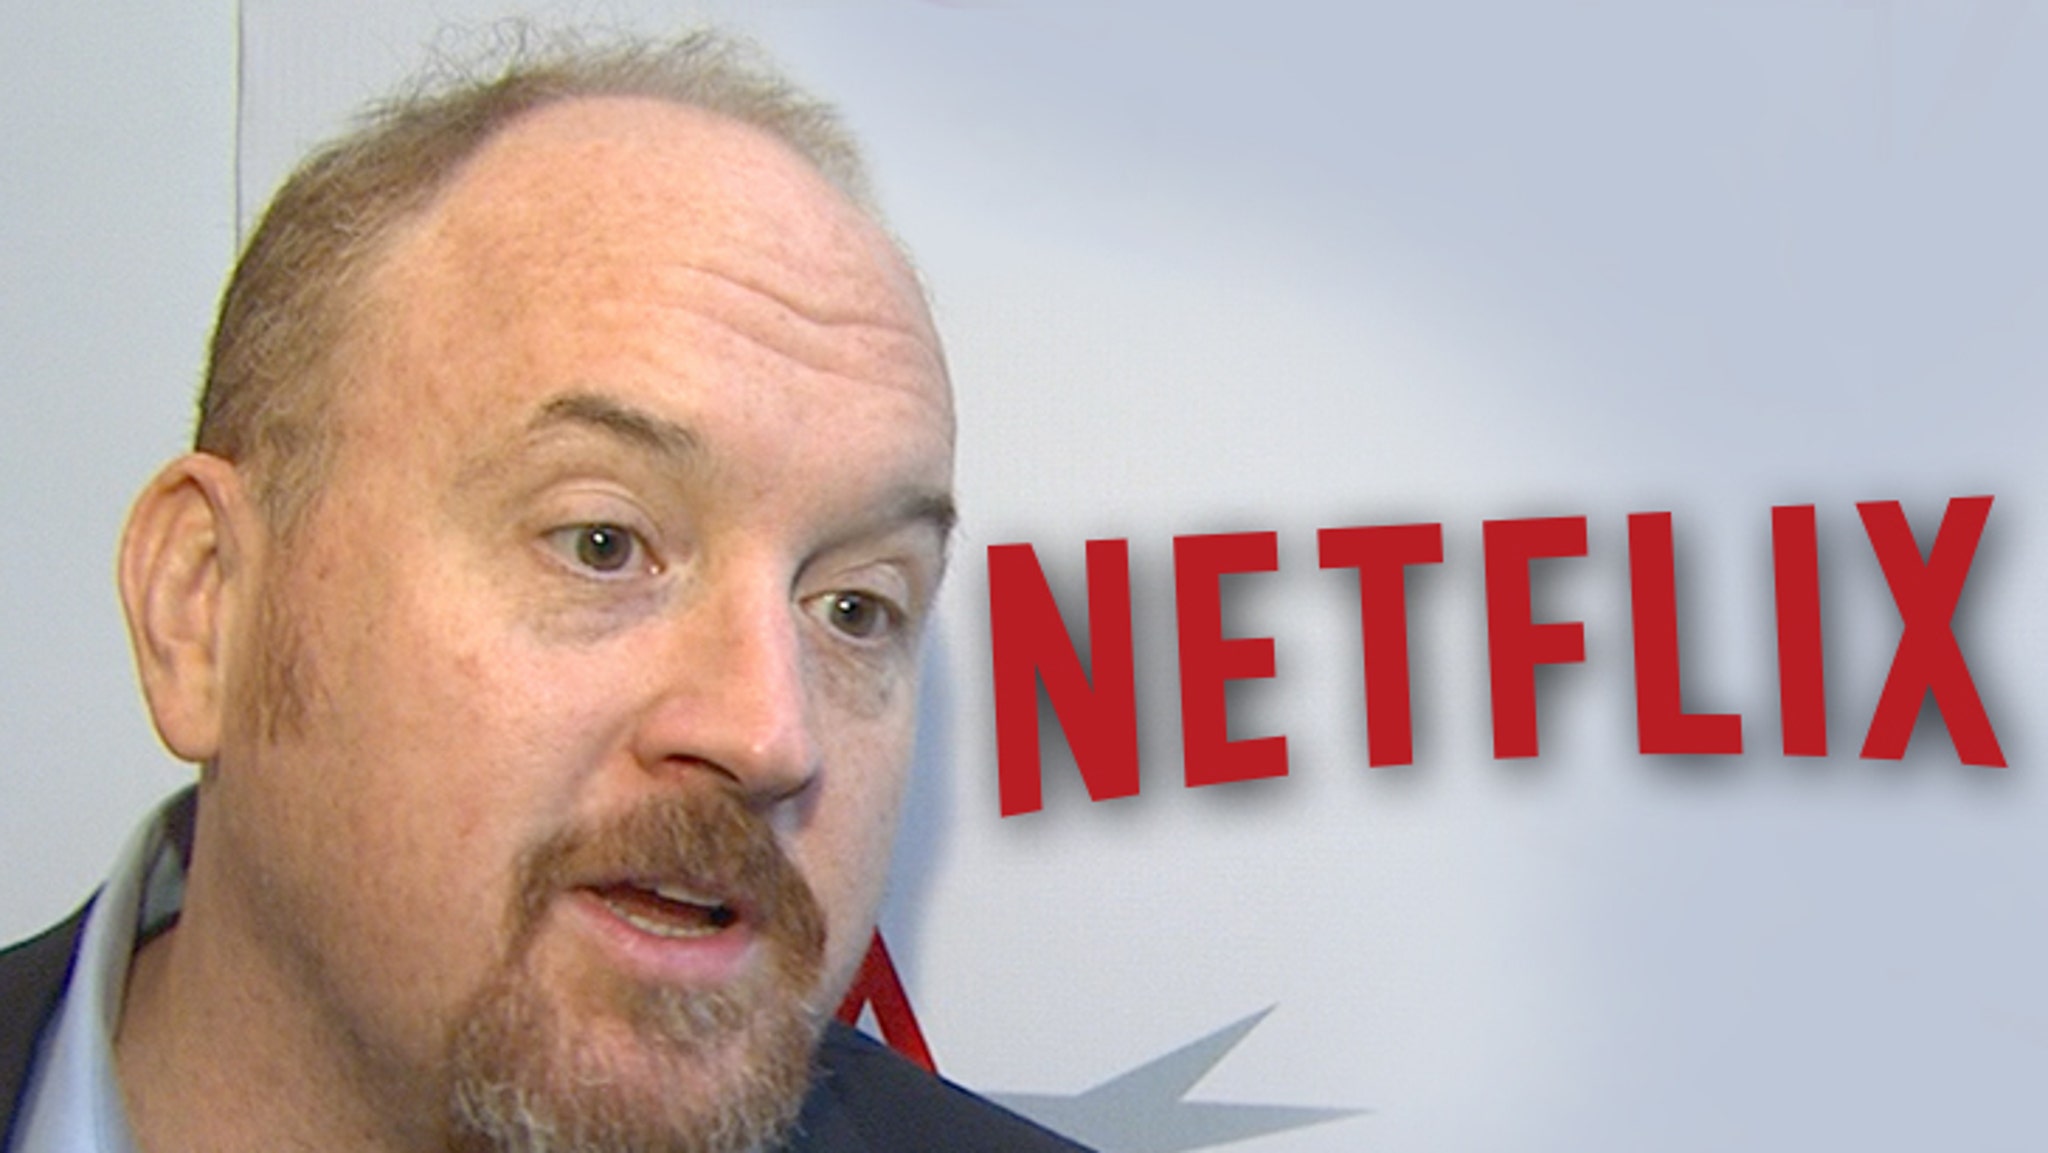 Netflix Backs Out of Louis C.K. Comedy Special